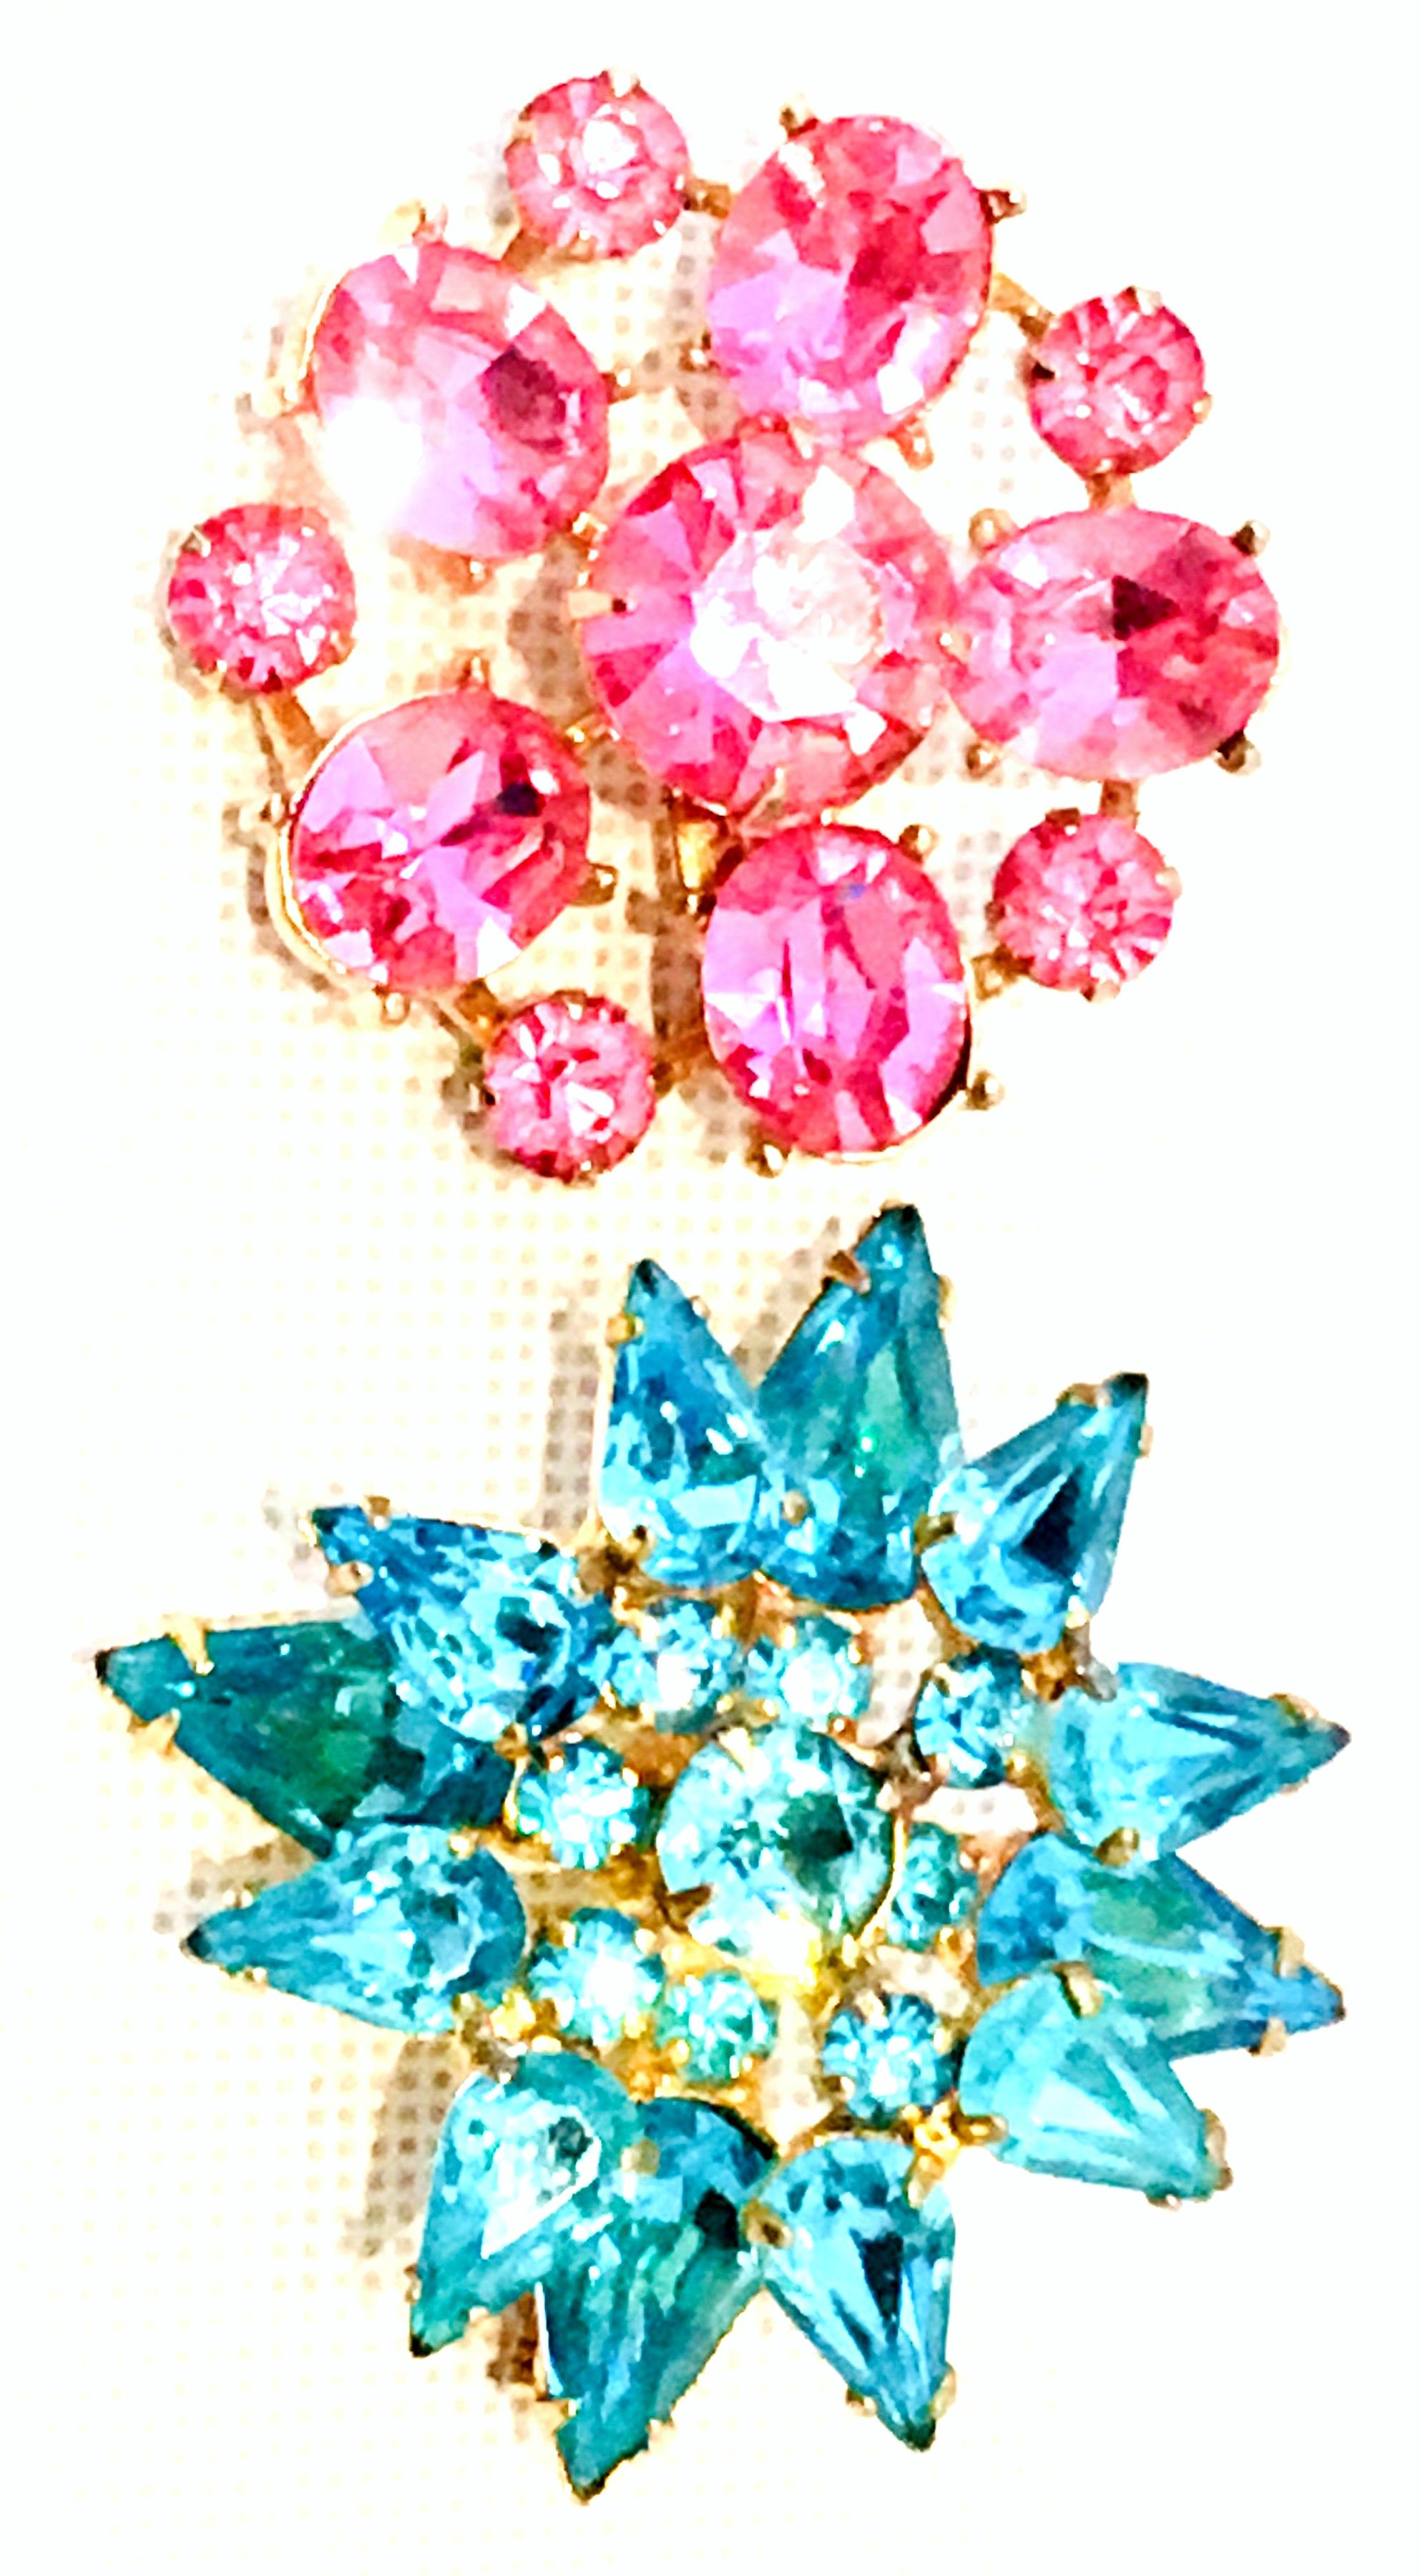 20th Century Pair Of Gold Plate & Austrian Sapphire Crystal Brooches By, Coro
The gold plate pink sapphire dimensional abstract floral brooch features brilliant cut and faceted fancy prong set stones and is signed Coro on the underside. The gold